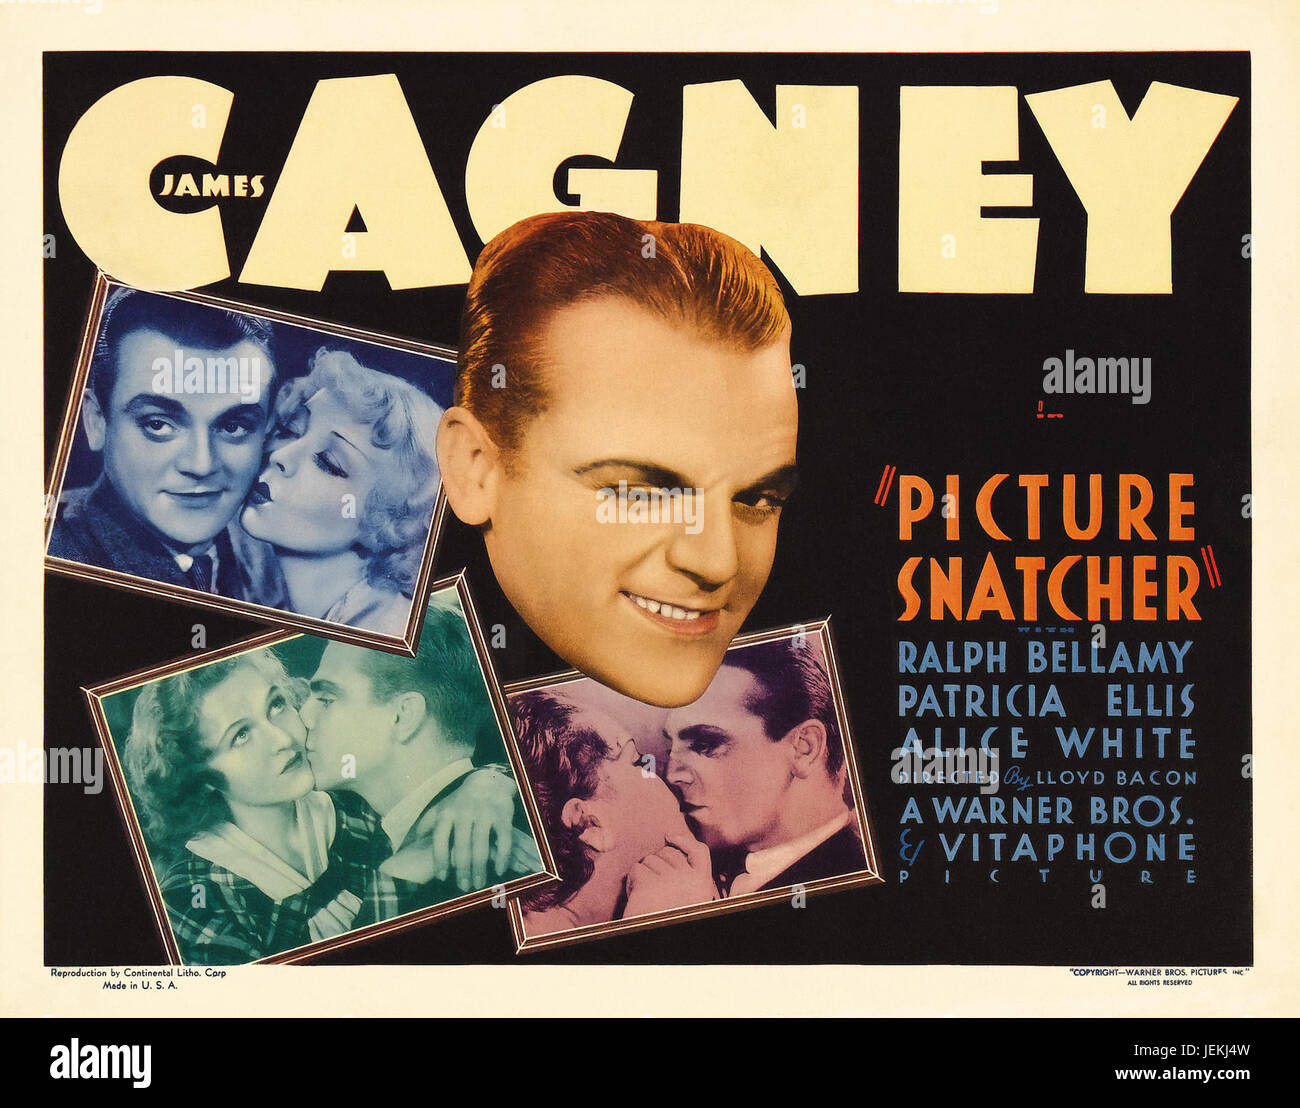 PICTURE SNATCHER 1933 Warner Bros film with James Cagney Stock Photo